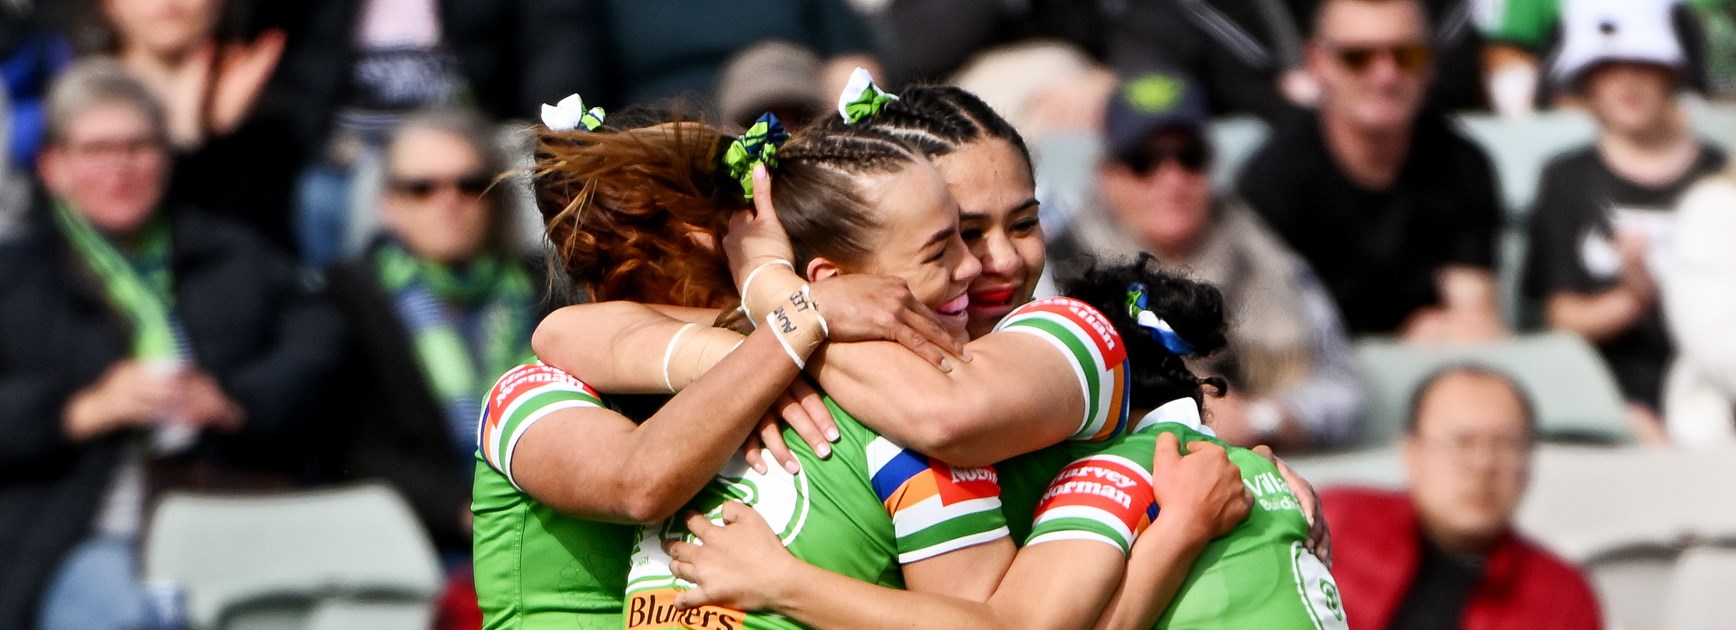 Raiders hold off Tigers for second NRLW win in a row